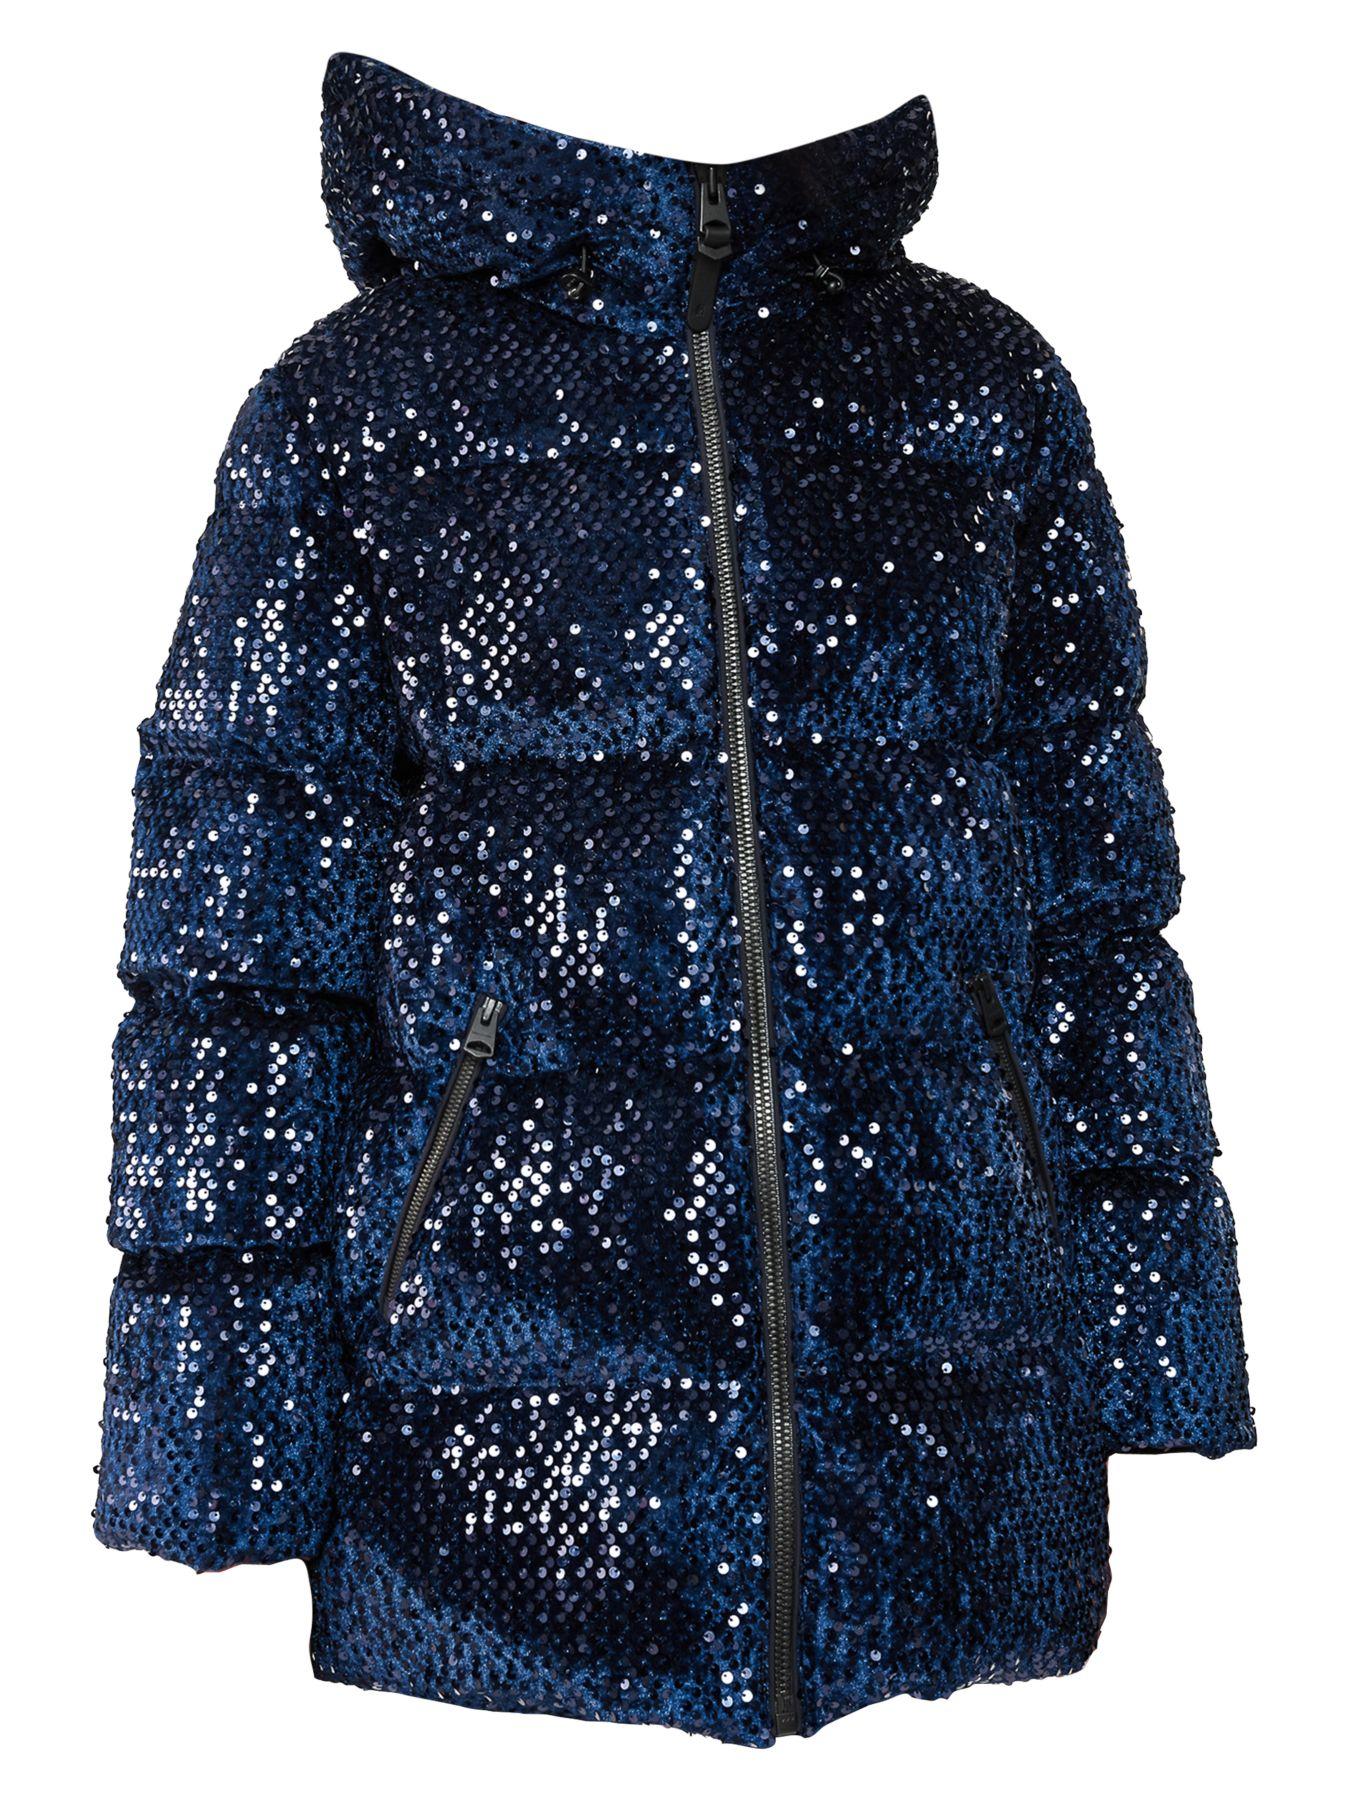 Mackage Hooded Sequin 800 Fill Power Down Puffer Jacket in Navy (Blue ...